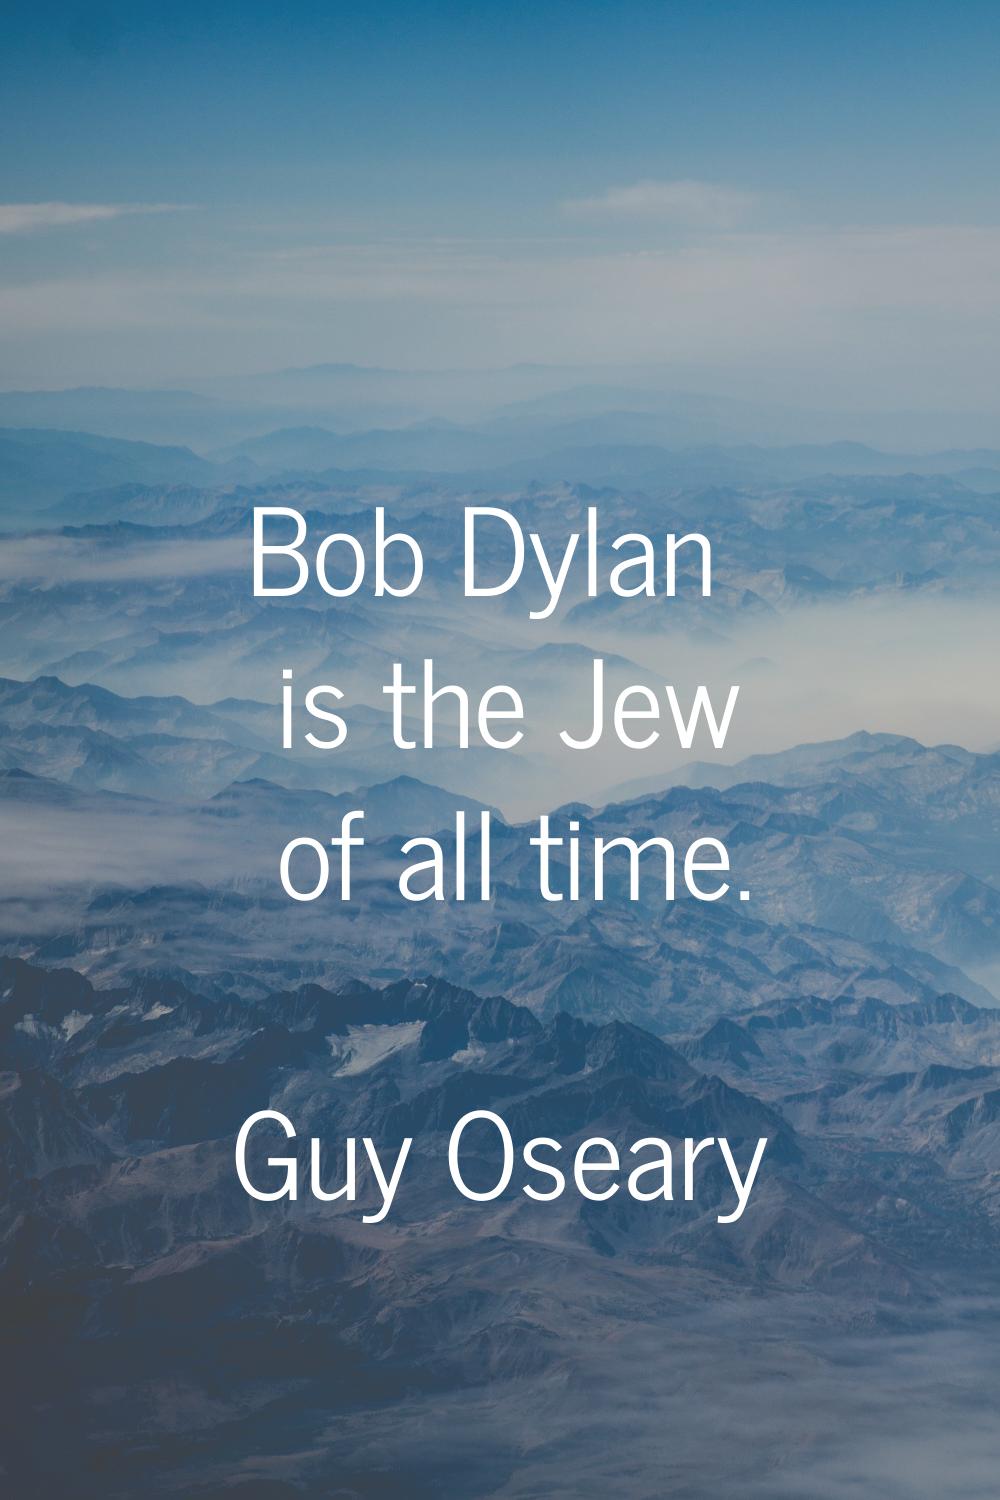 Bob Dylan is the Jew of all time.